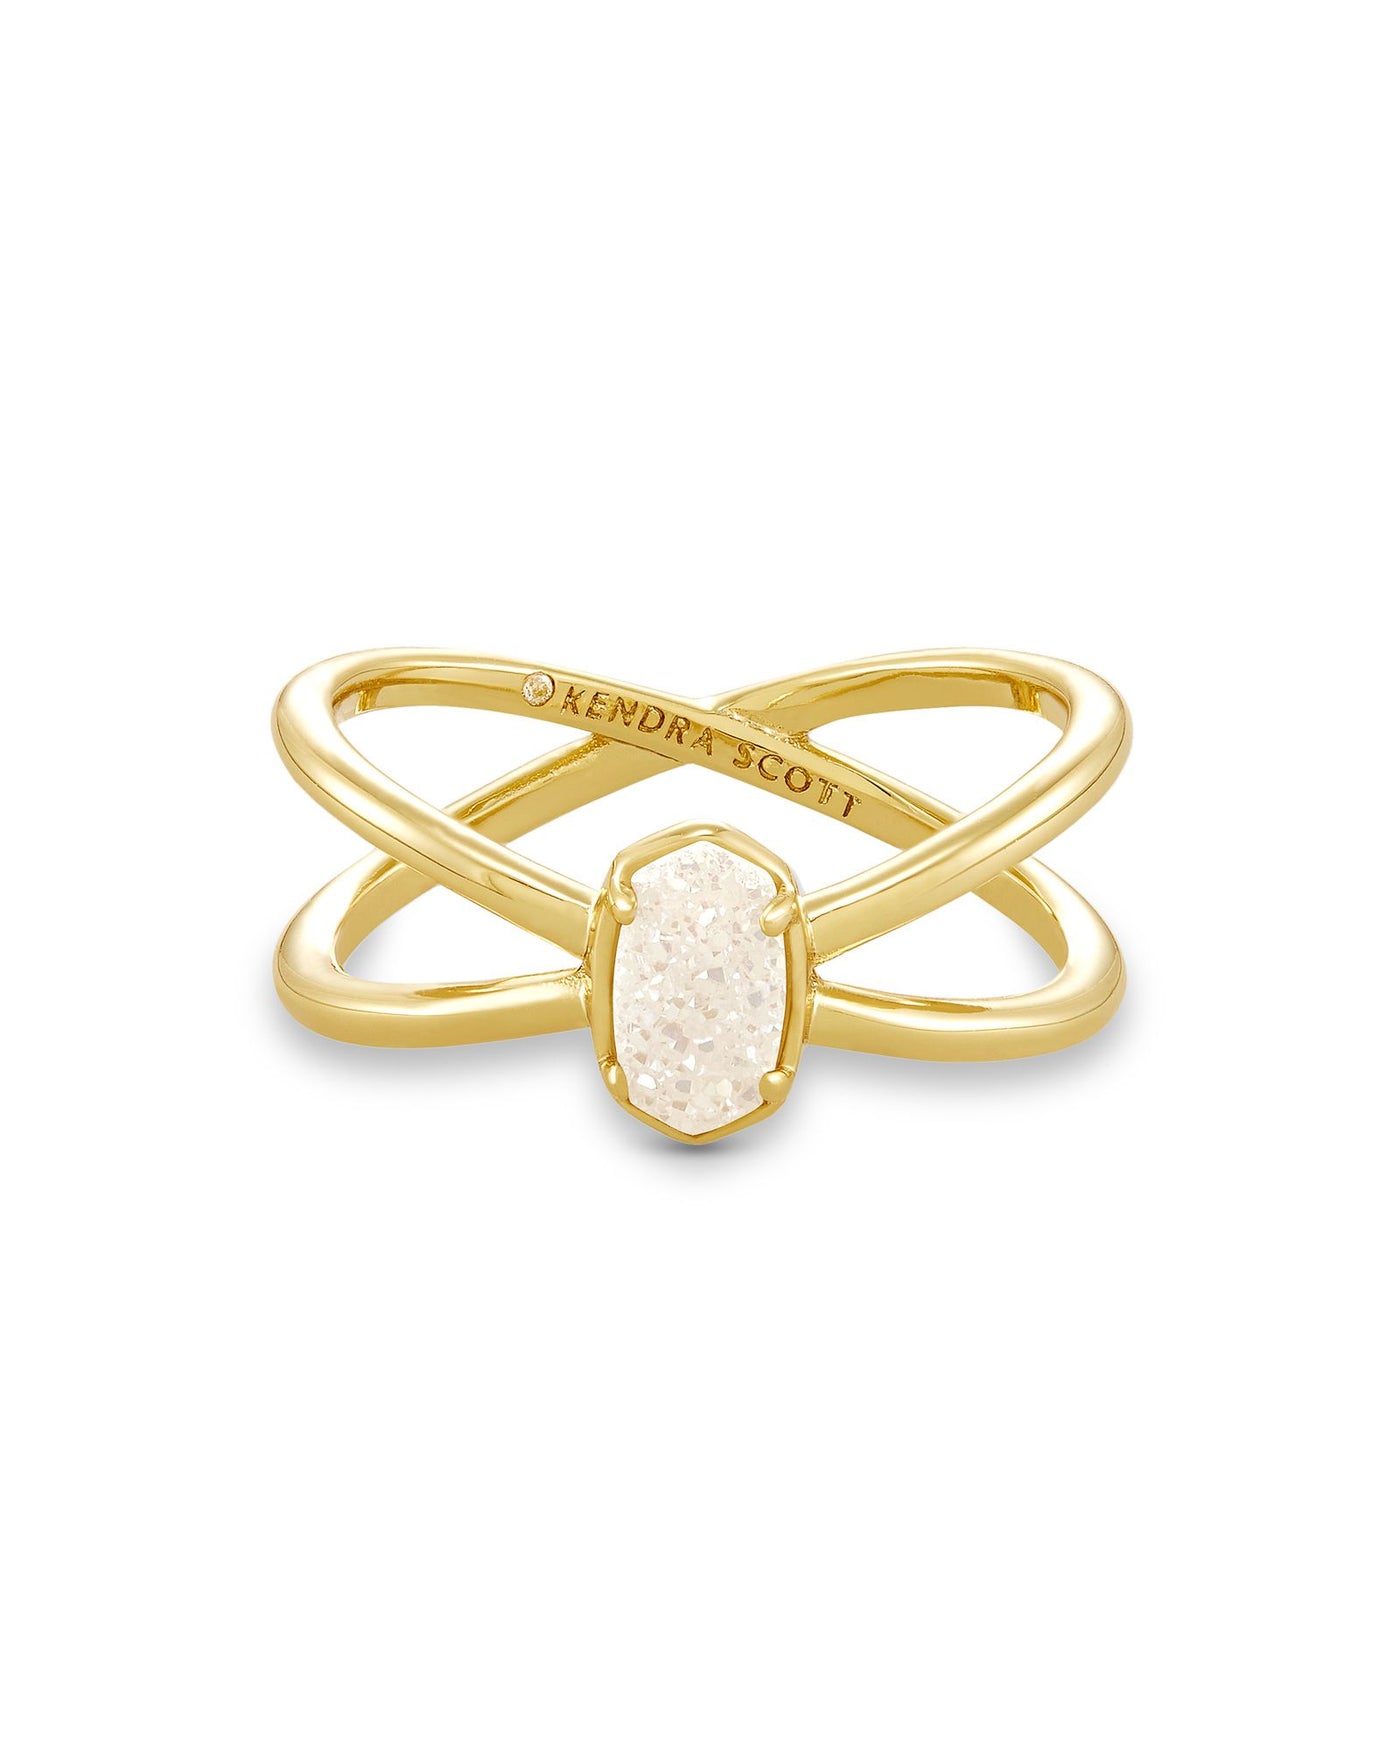 Emilie Double Band Ring Gold Iridescent Drusy on white background, front view.